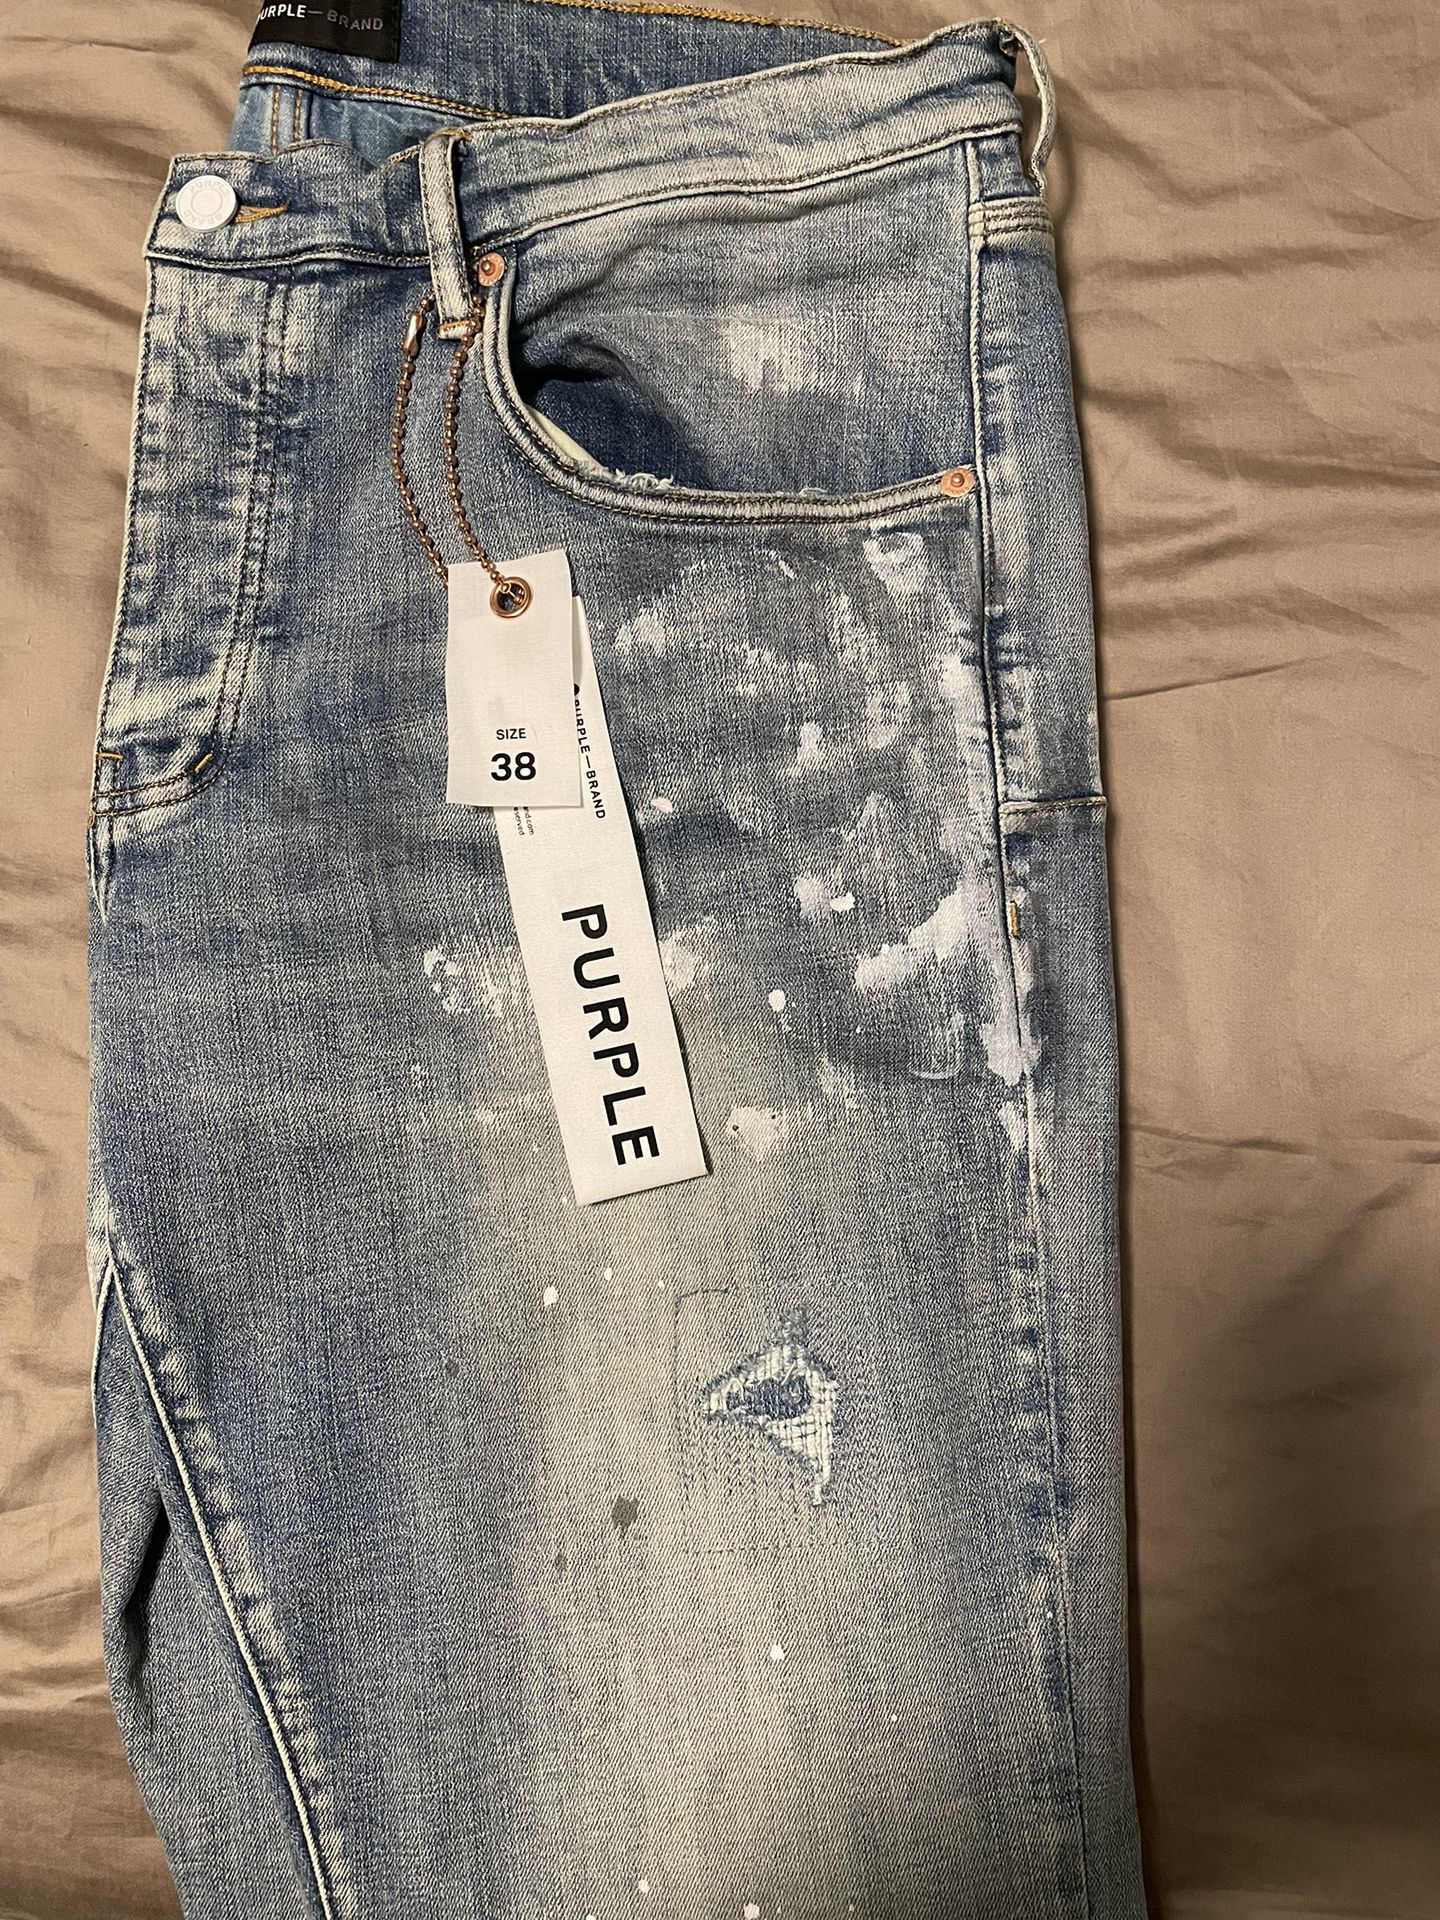 Mens Purple Brand Jeans - Size 38- Worn Once -No Trades for Sale in  Sacramento, CA - OfferUp